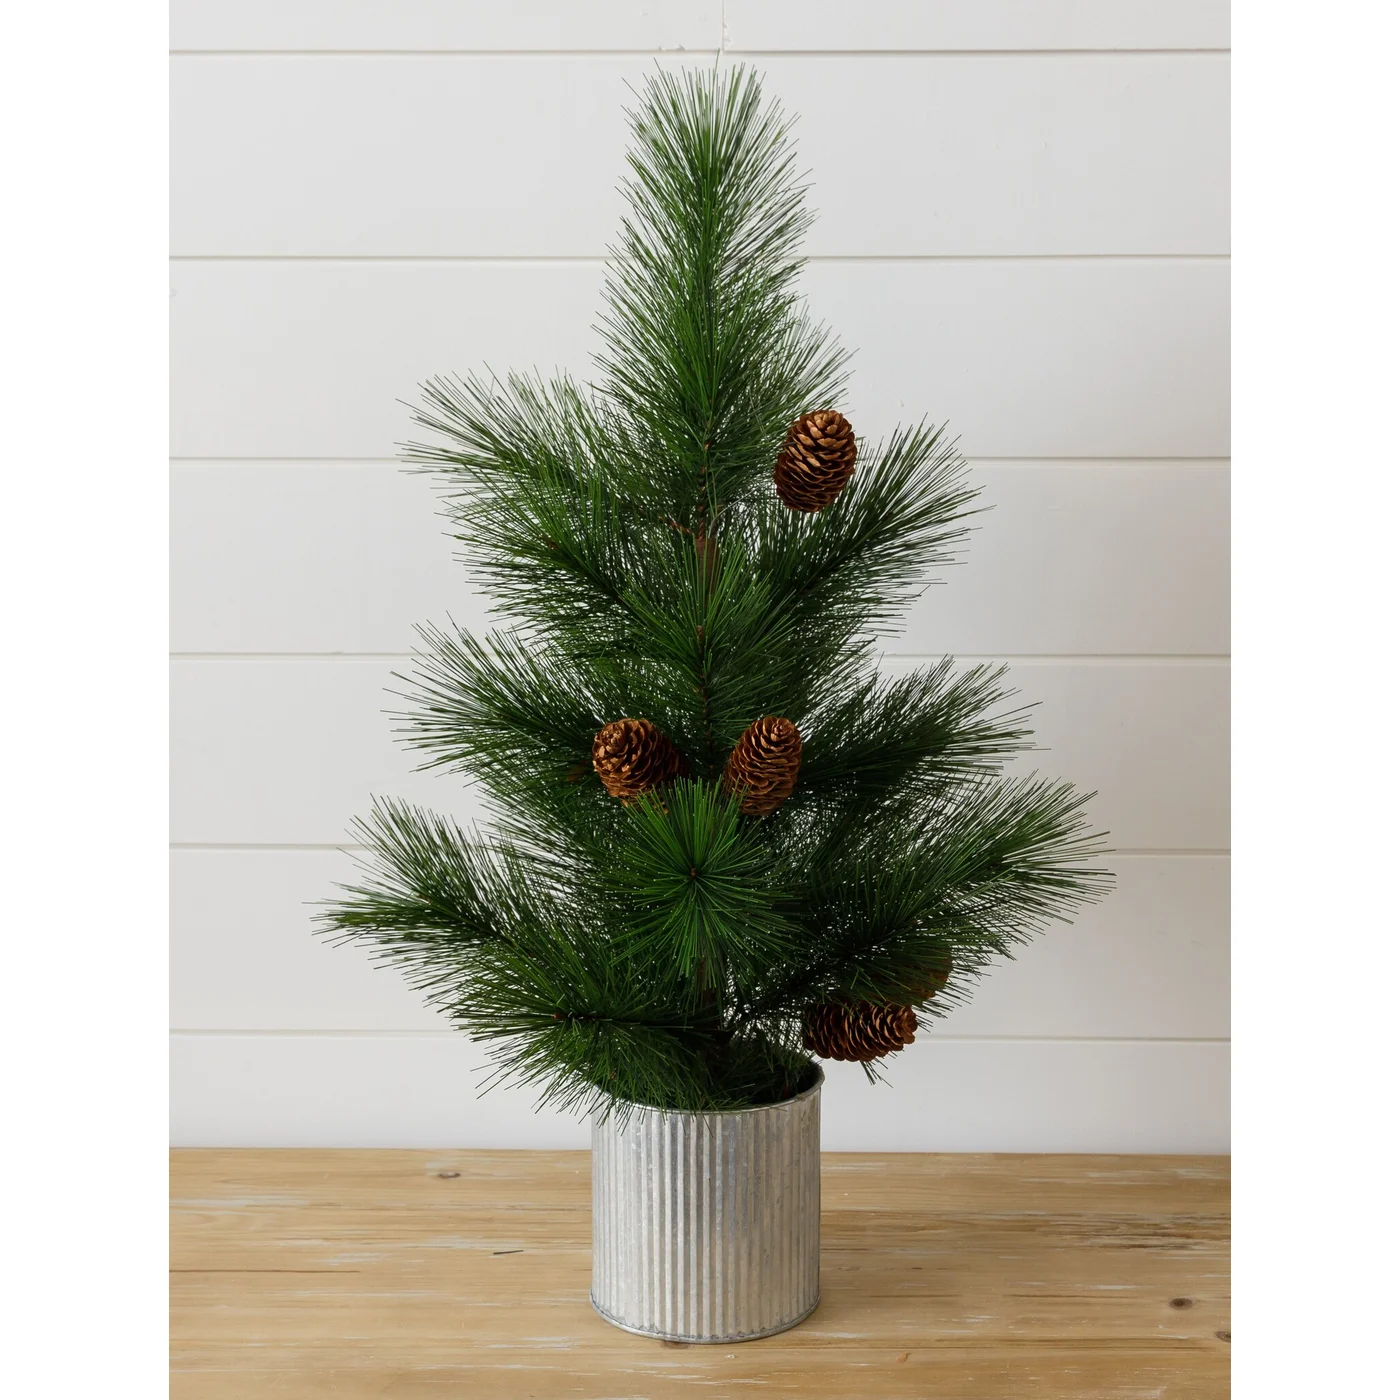 White Faux Pine Tree With Pinecones In Metal Pot 25" H